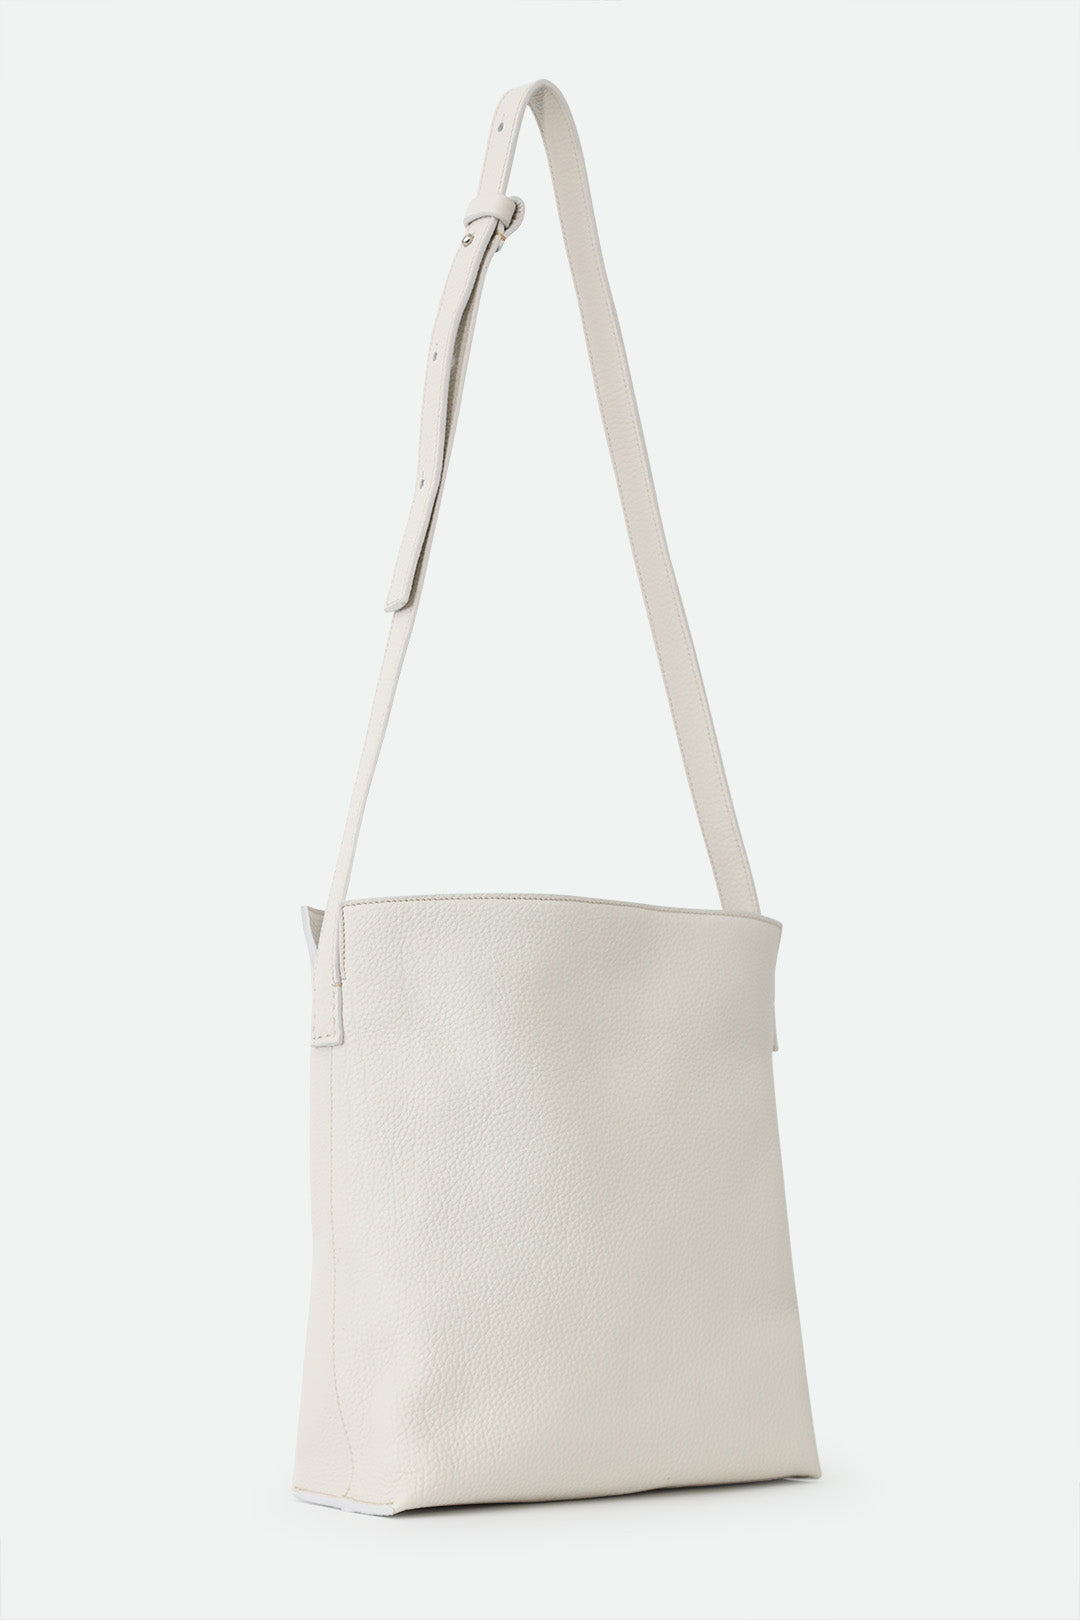 VINCENZA ITALIAN LEATHER BUCKET BAG BUTTER WHITE - PRE-ORDER NOW